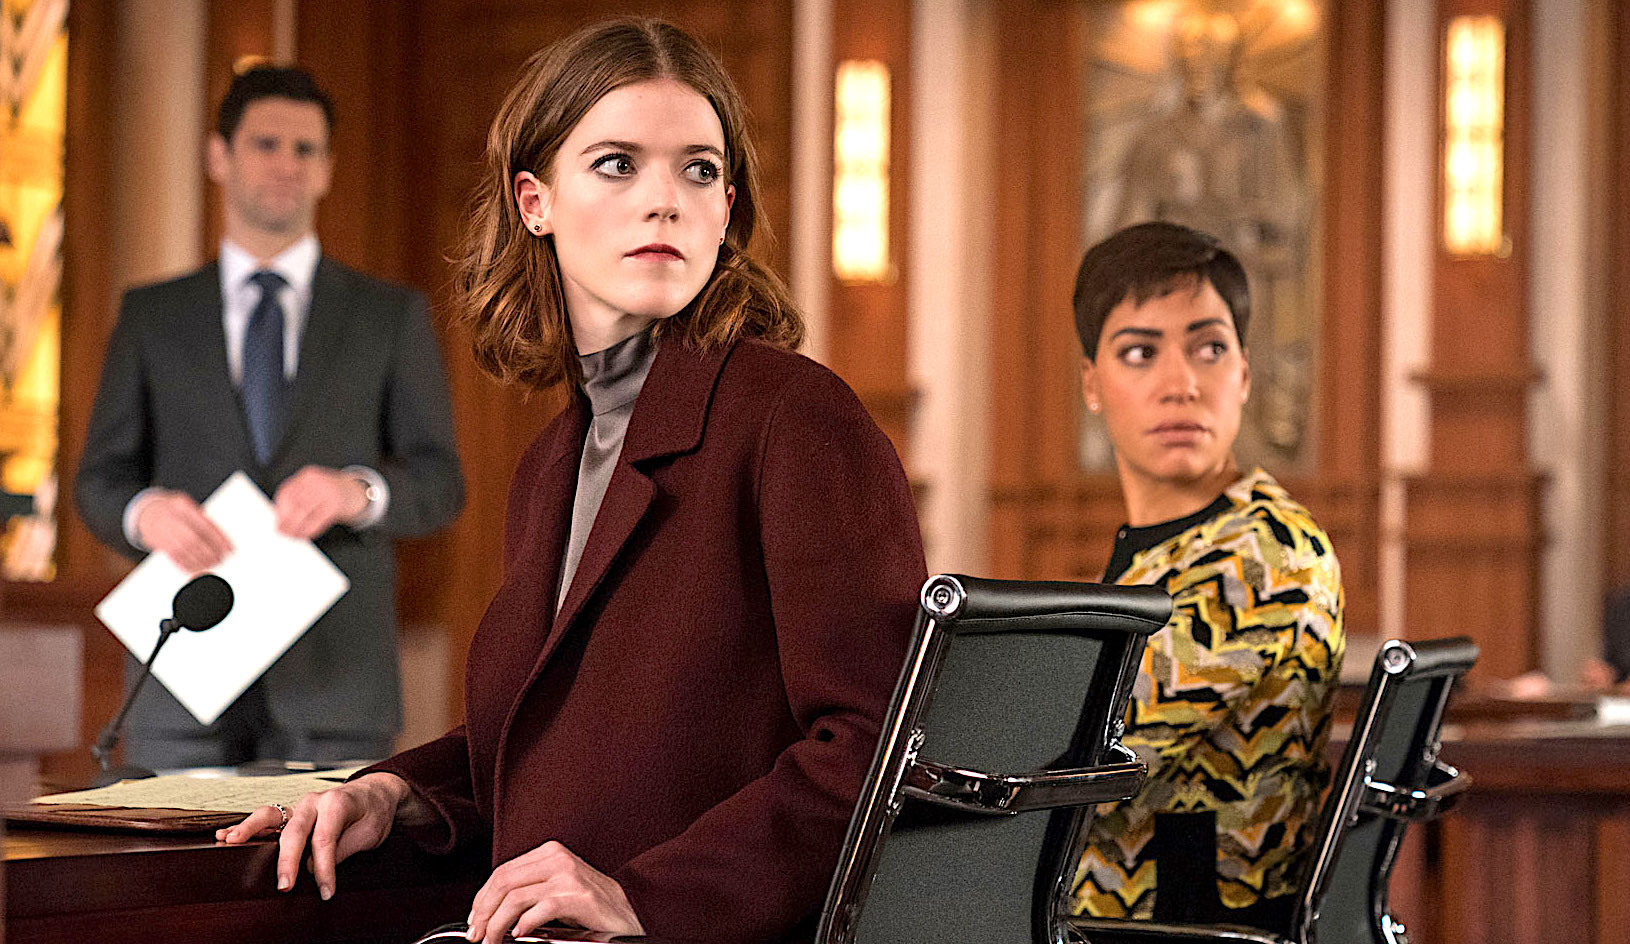 The Good Fight Series 2 More4 Review The Longer They Do It The